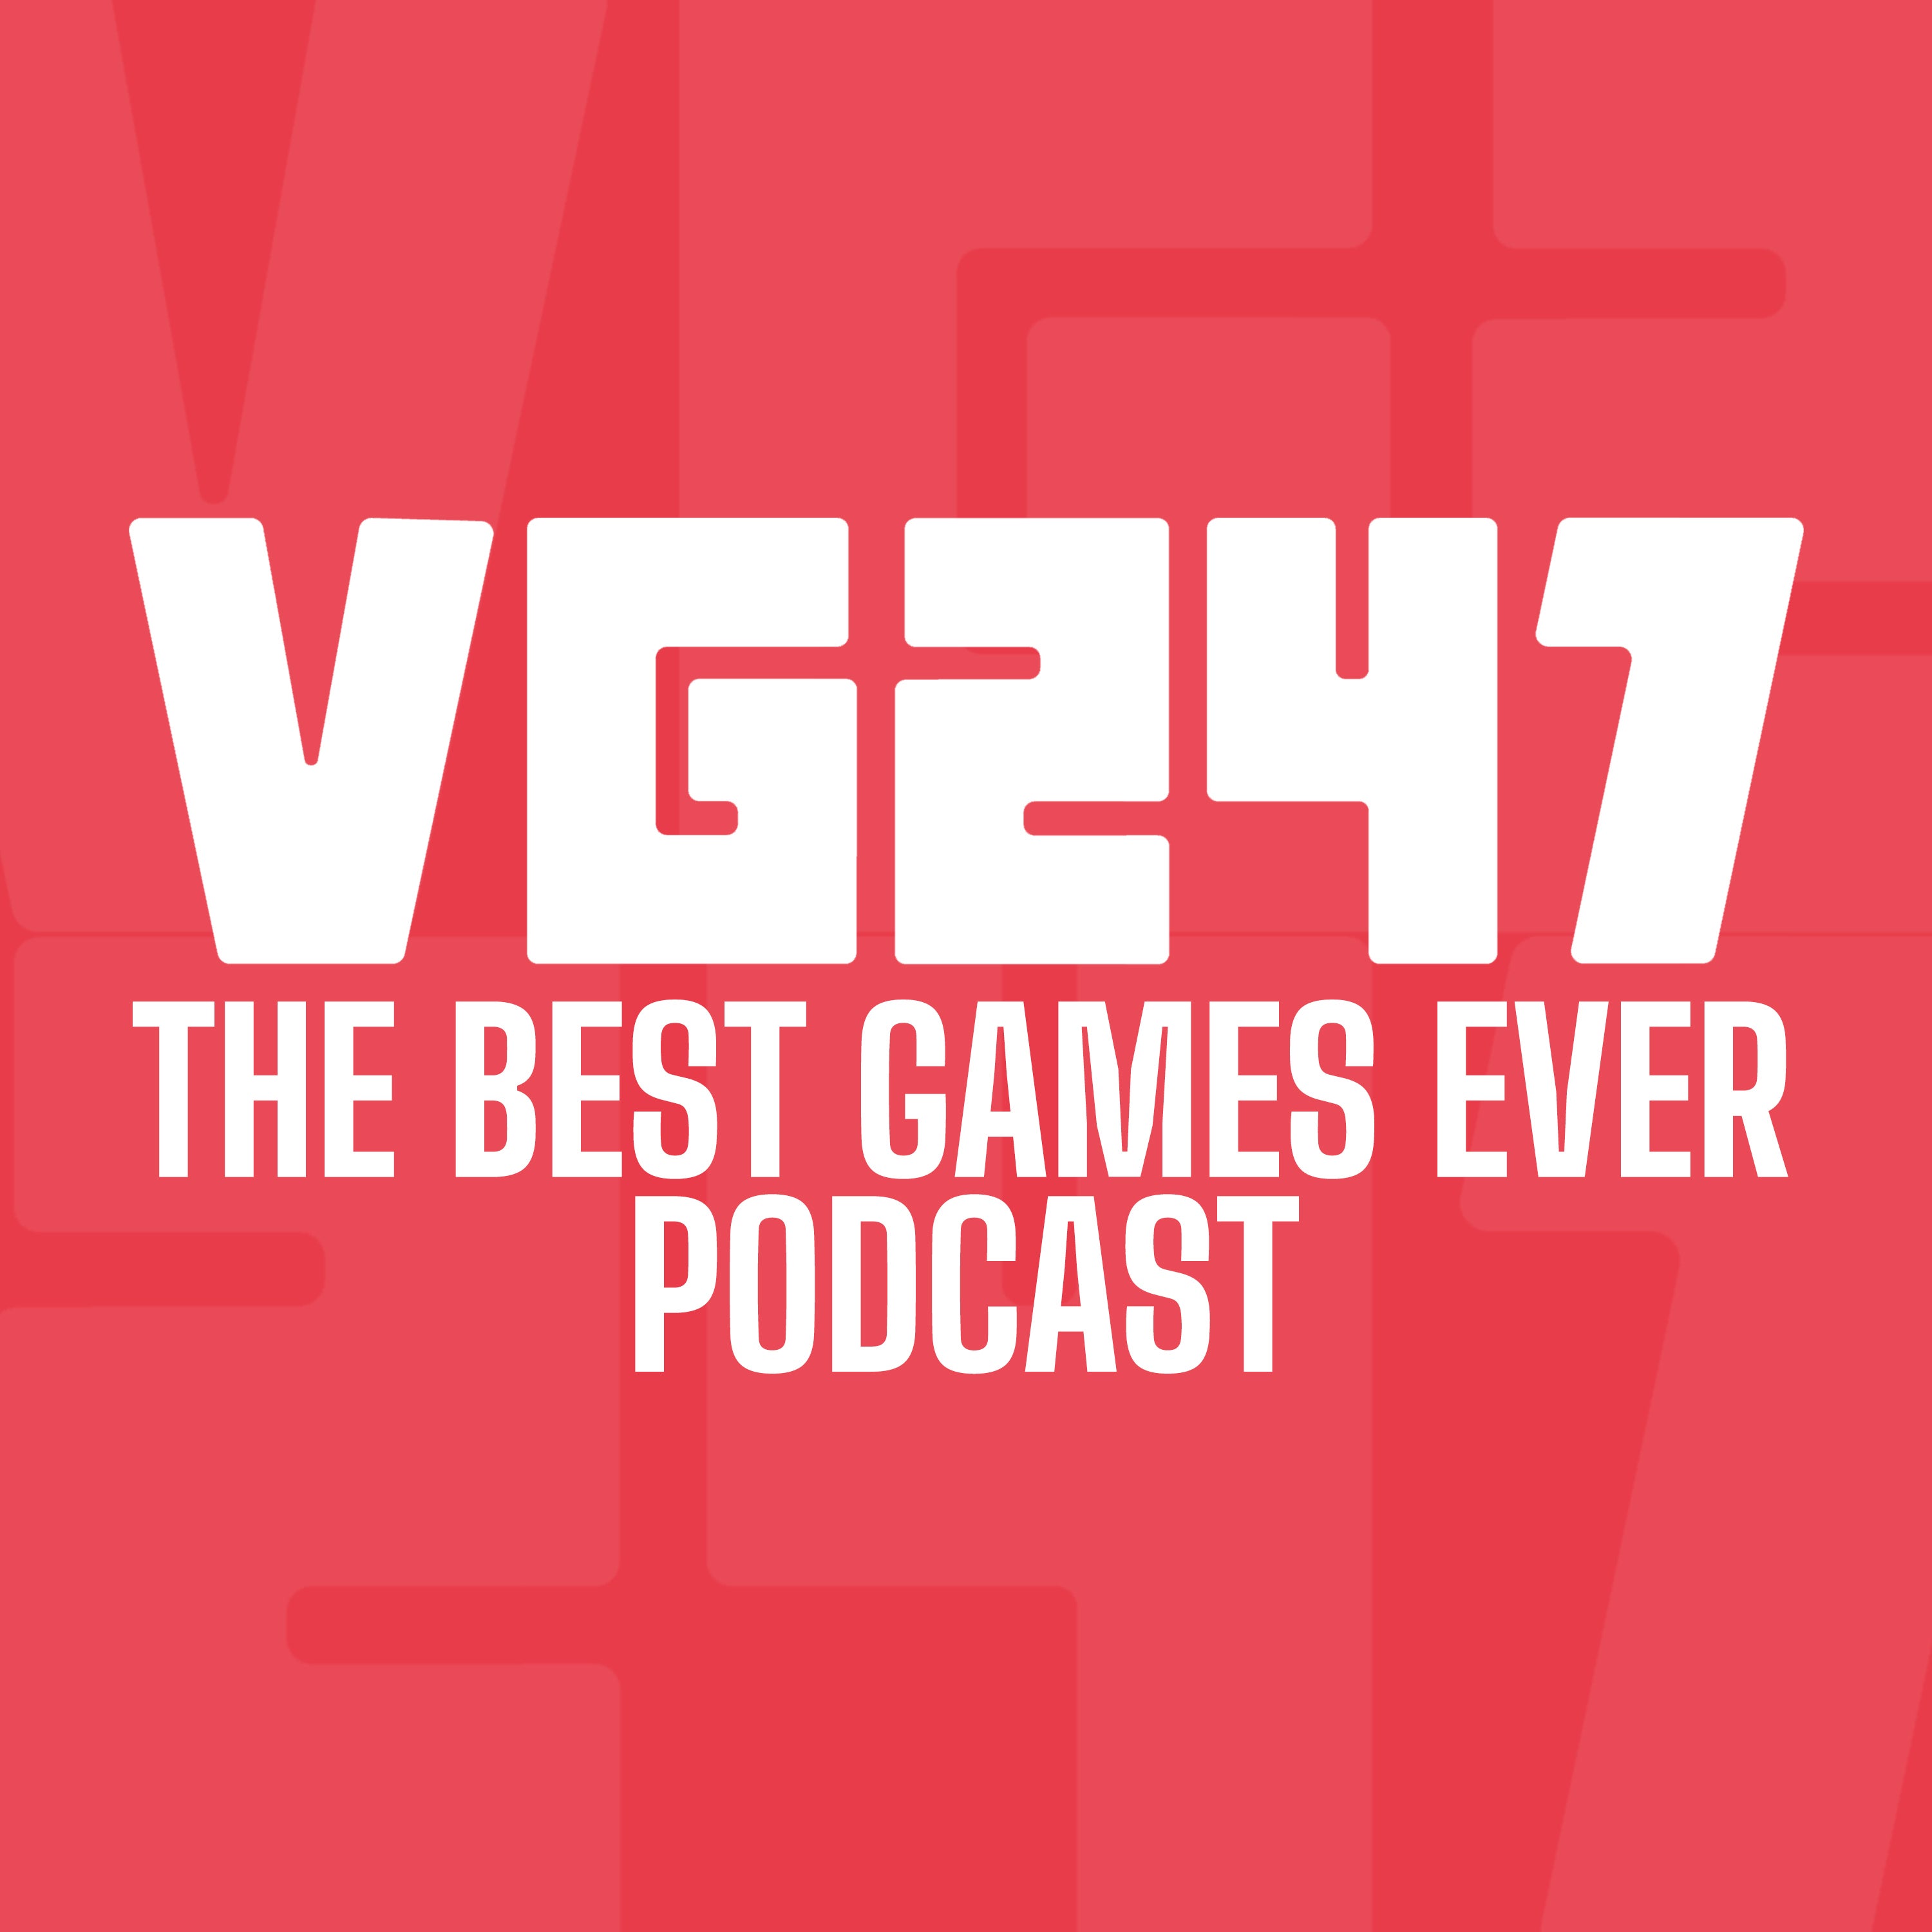 Logo for VG247's best gaming podcast of all time.  White text on red background.